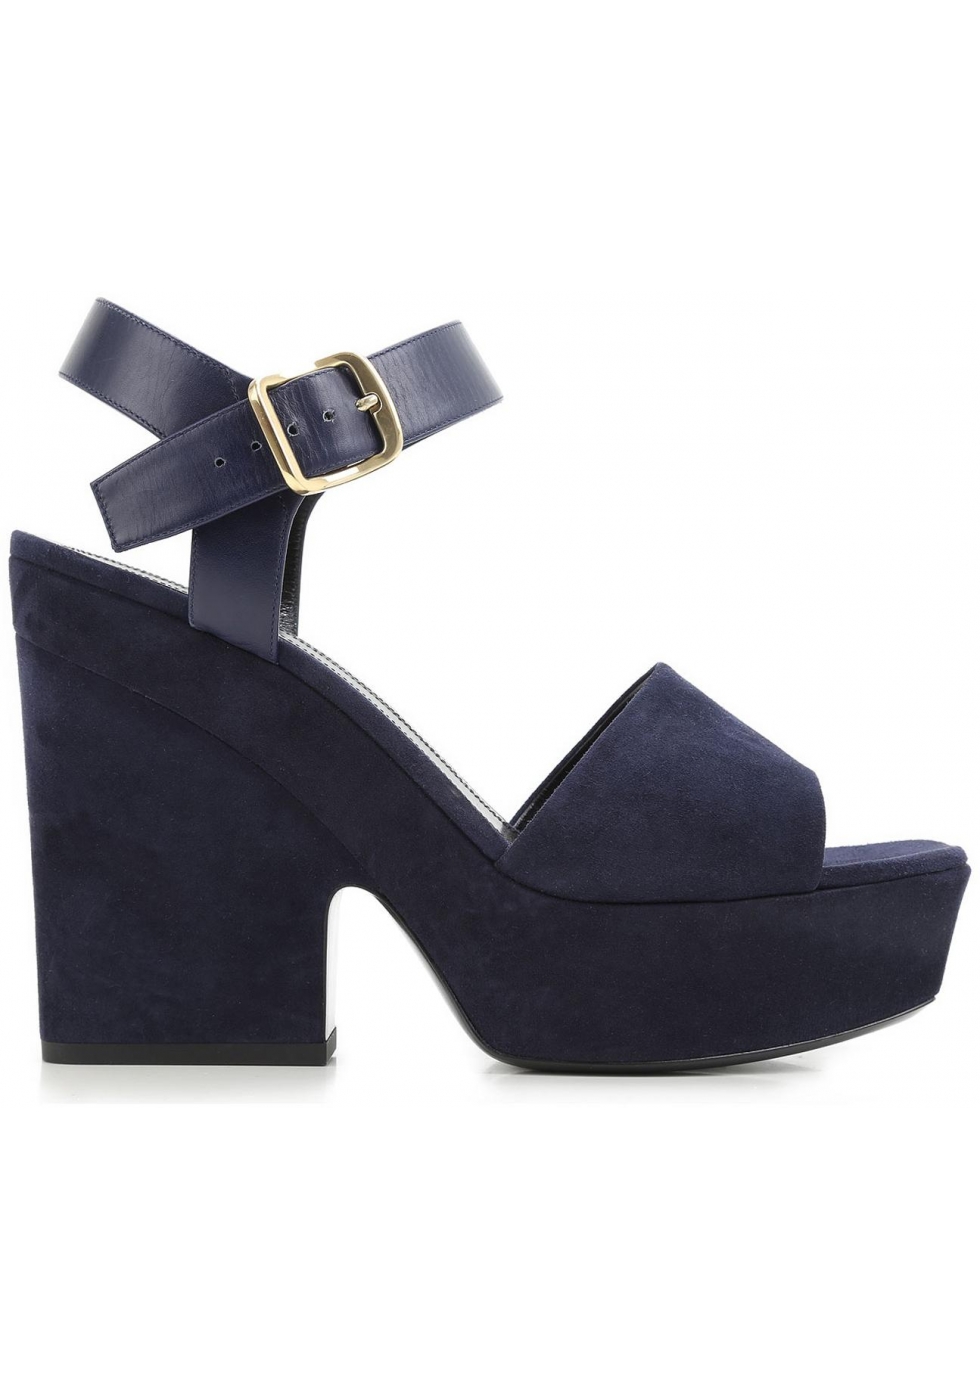 Céline wedges sandals in navy blue suede leather - Italian Boutique